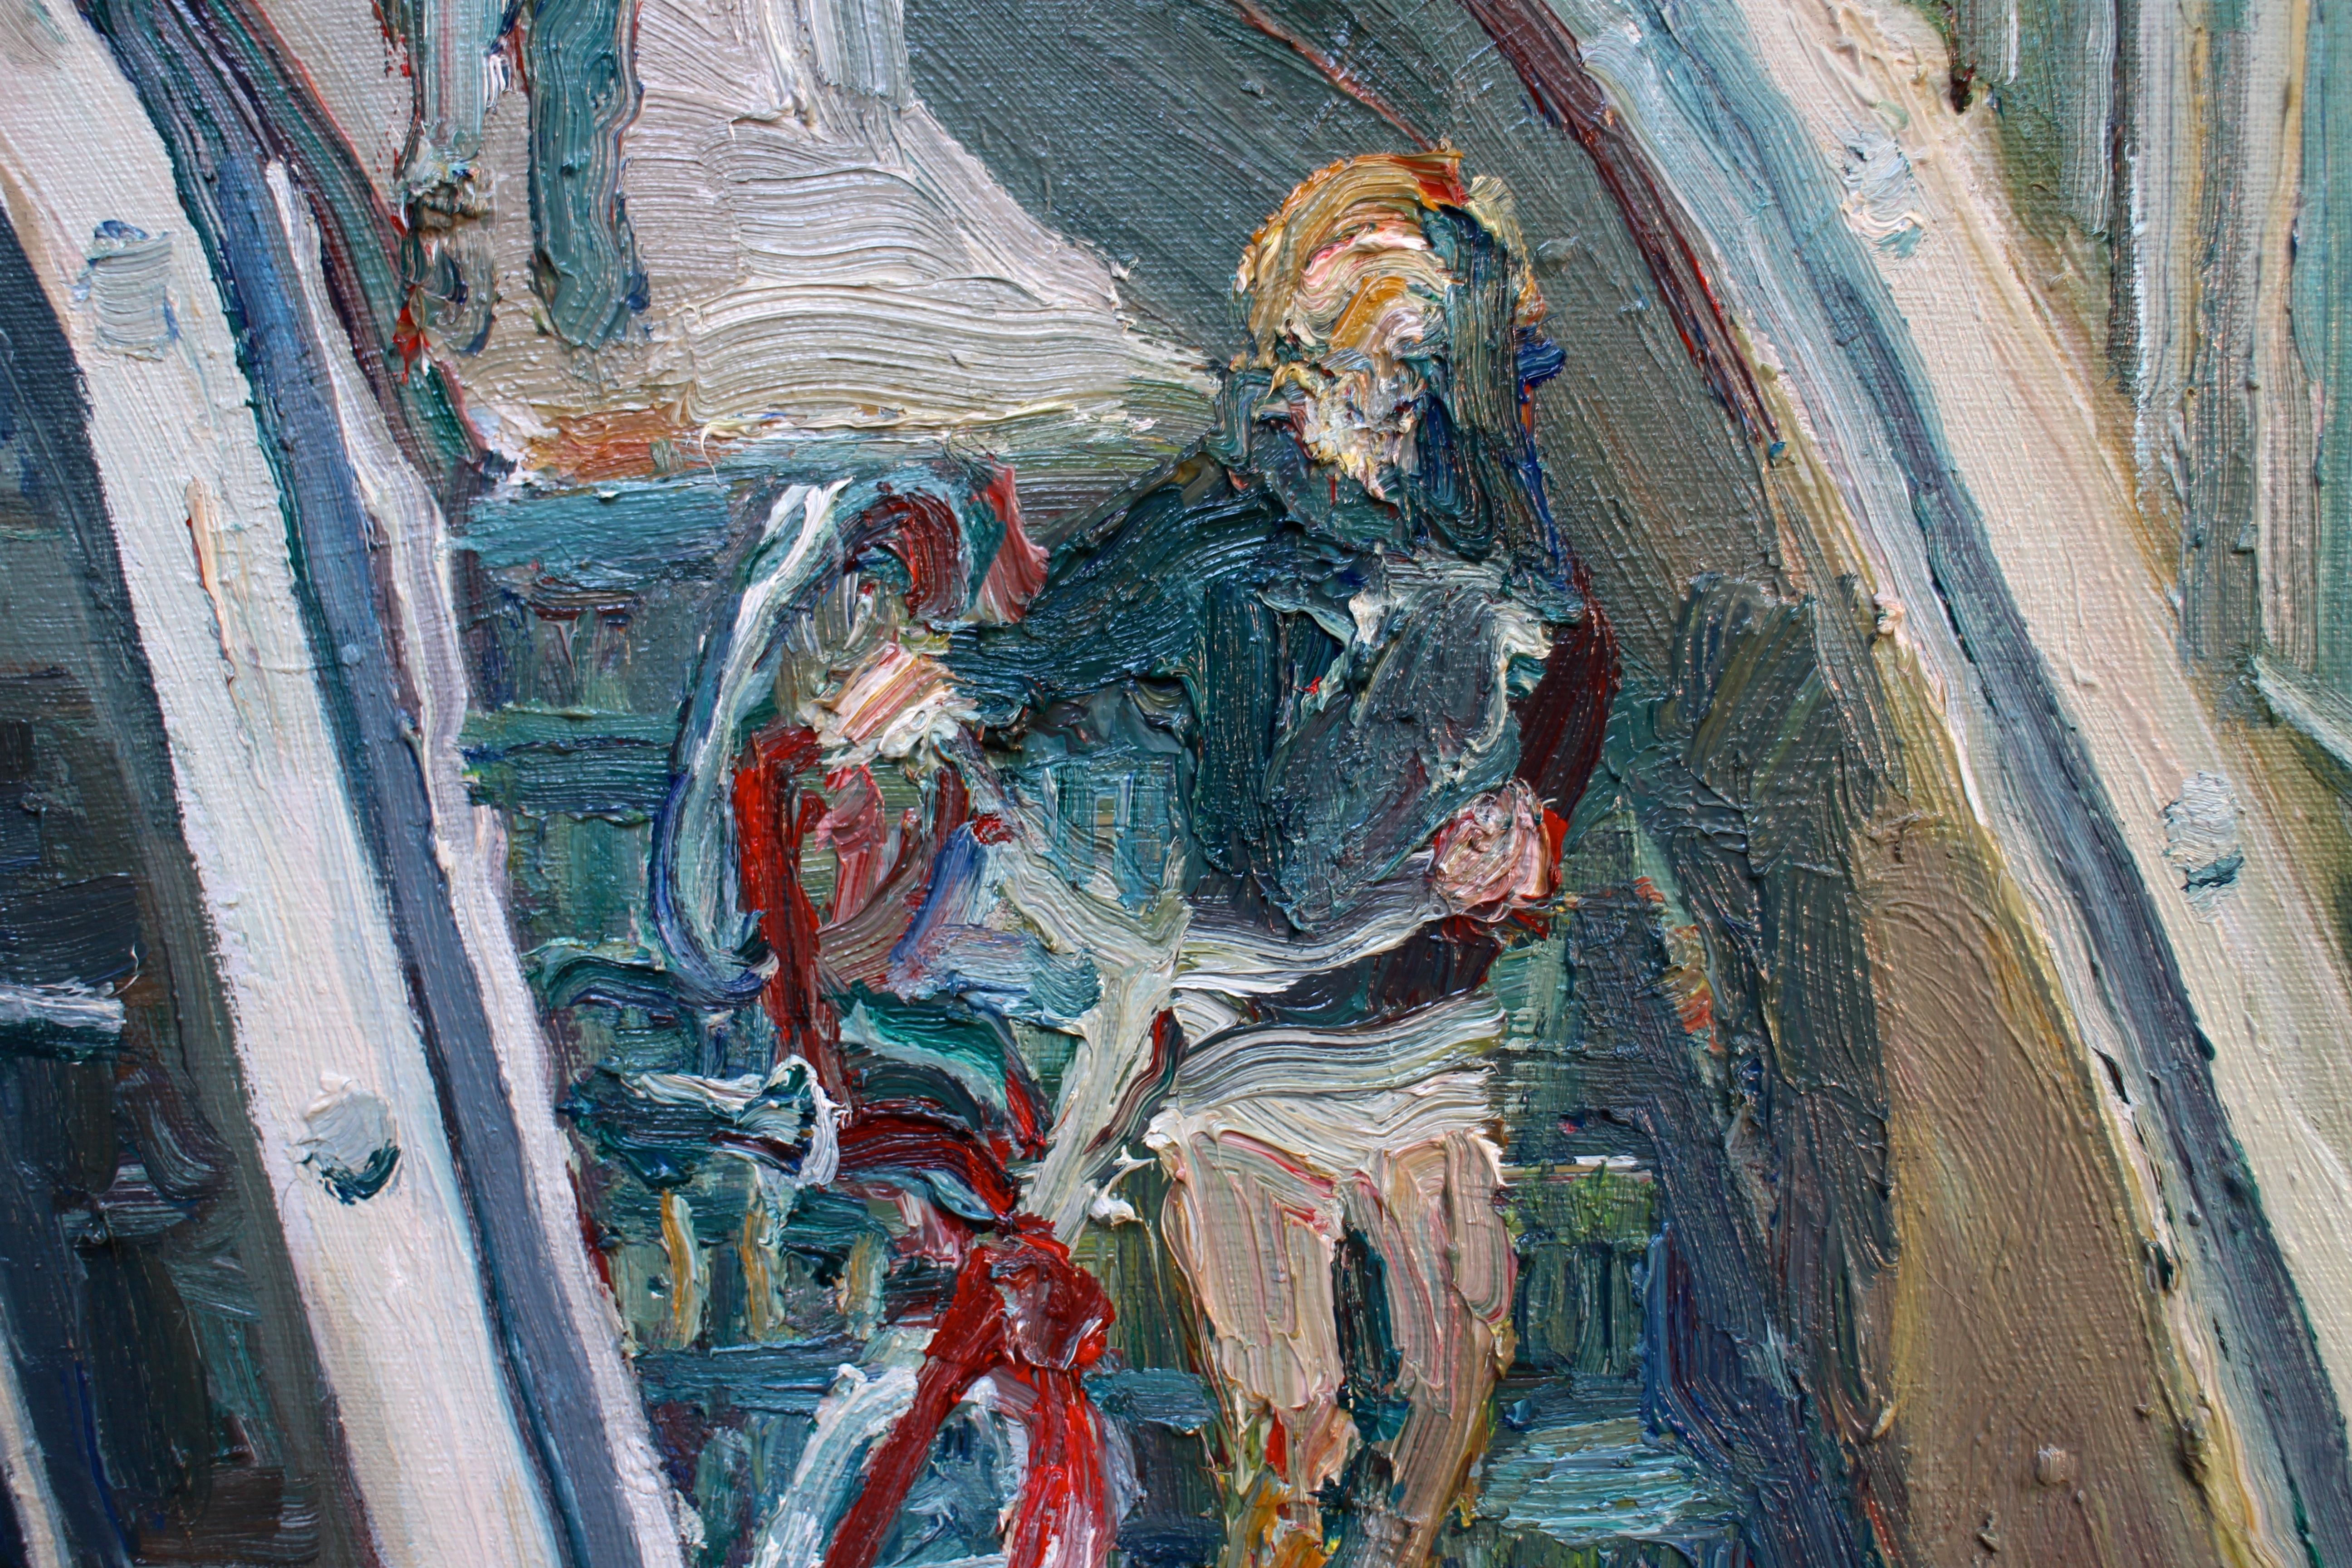 I did this painting while running on a treadmill in my studio. I have found it resembles what it's like to paint on location (plein air). The image is of a person taking their bicycle down the escalator at the Embarcadero Bart Station in San